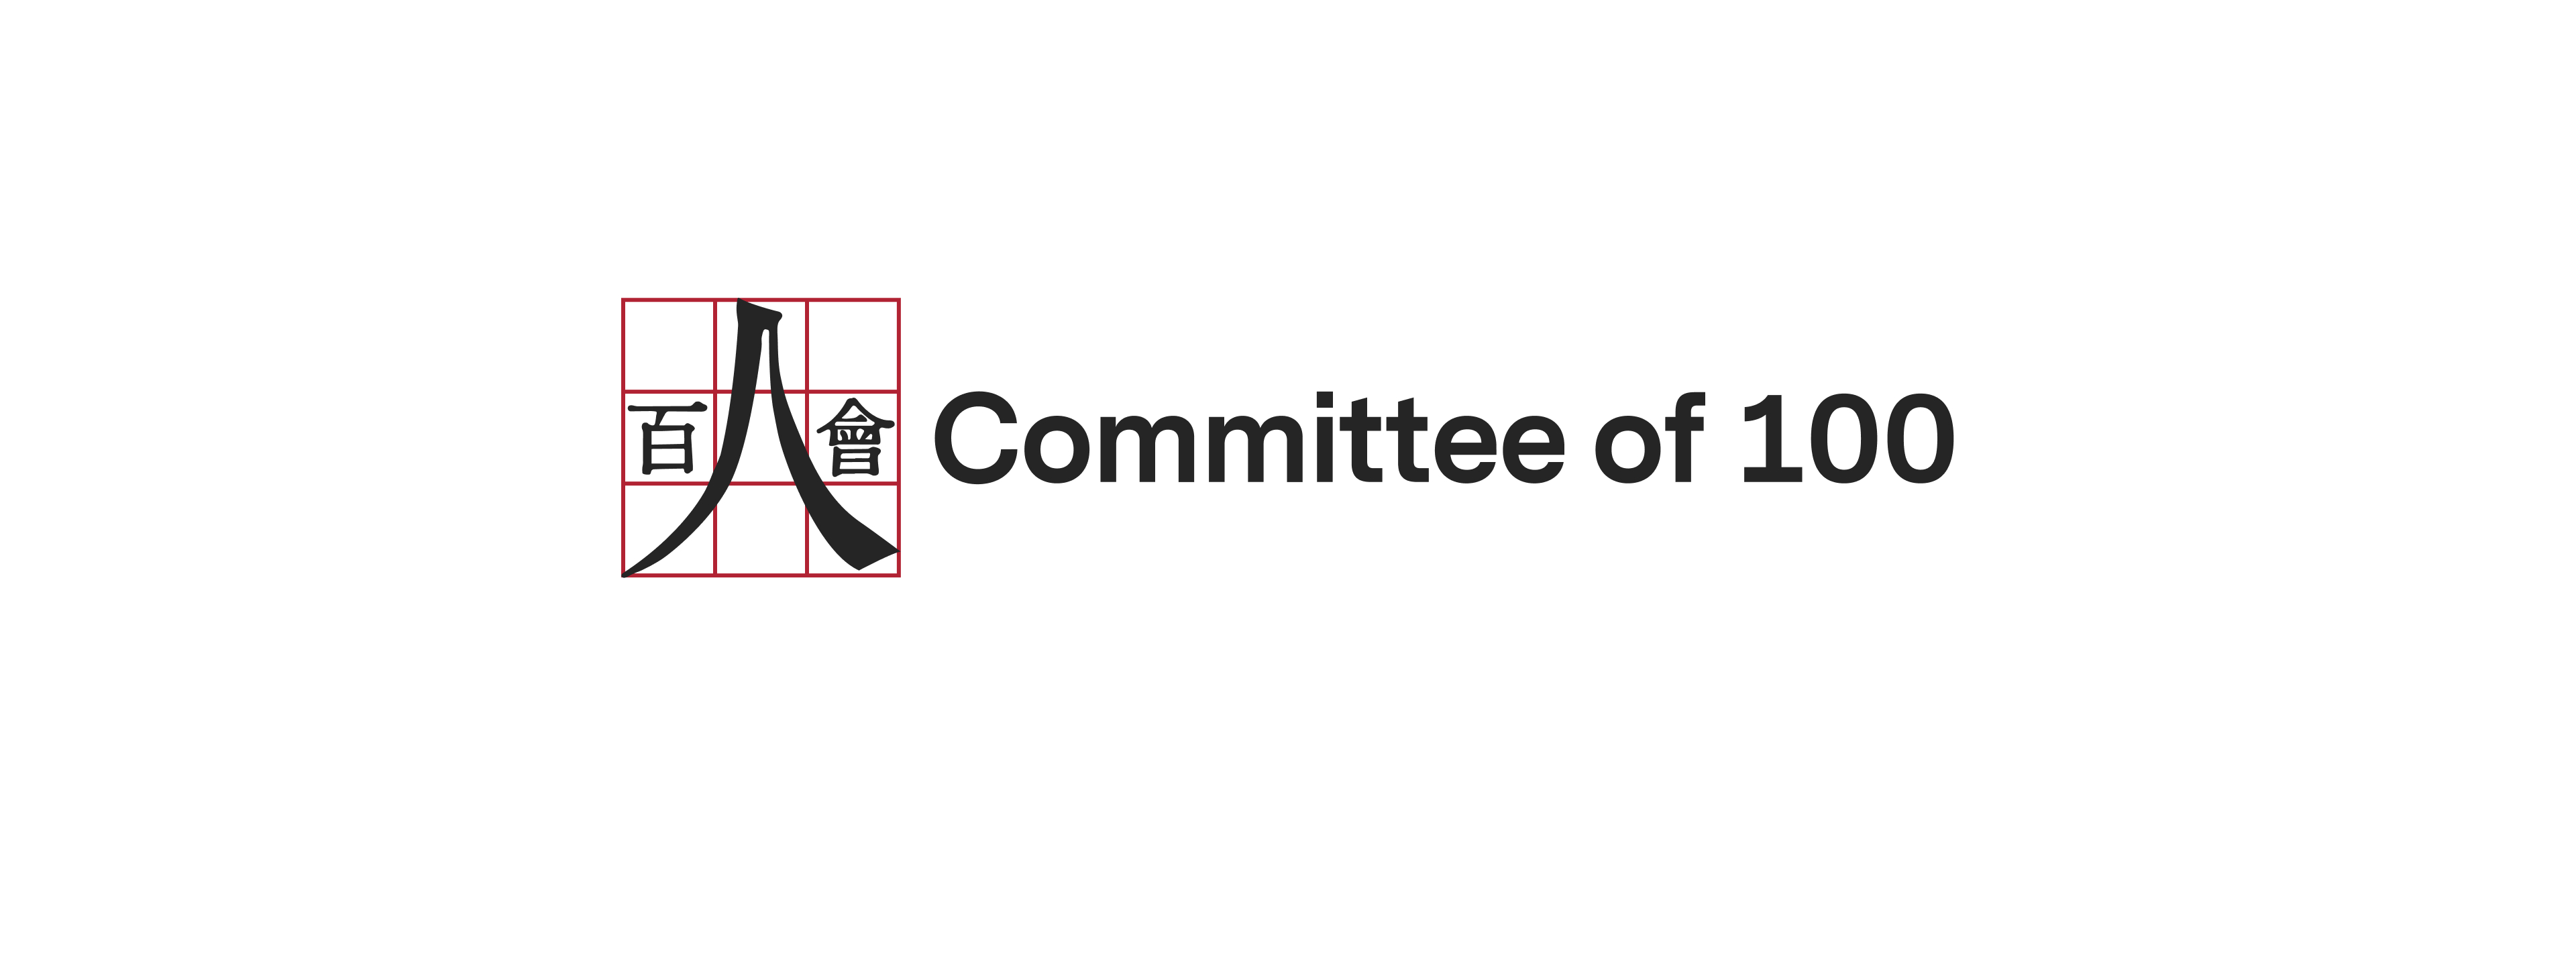 Leading Chinese American Organization Committee of 100 to Discuss Critical Issues in U.S.-China